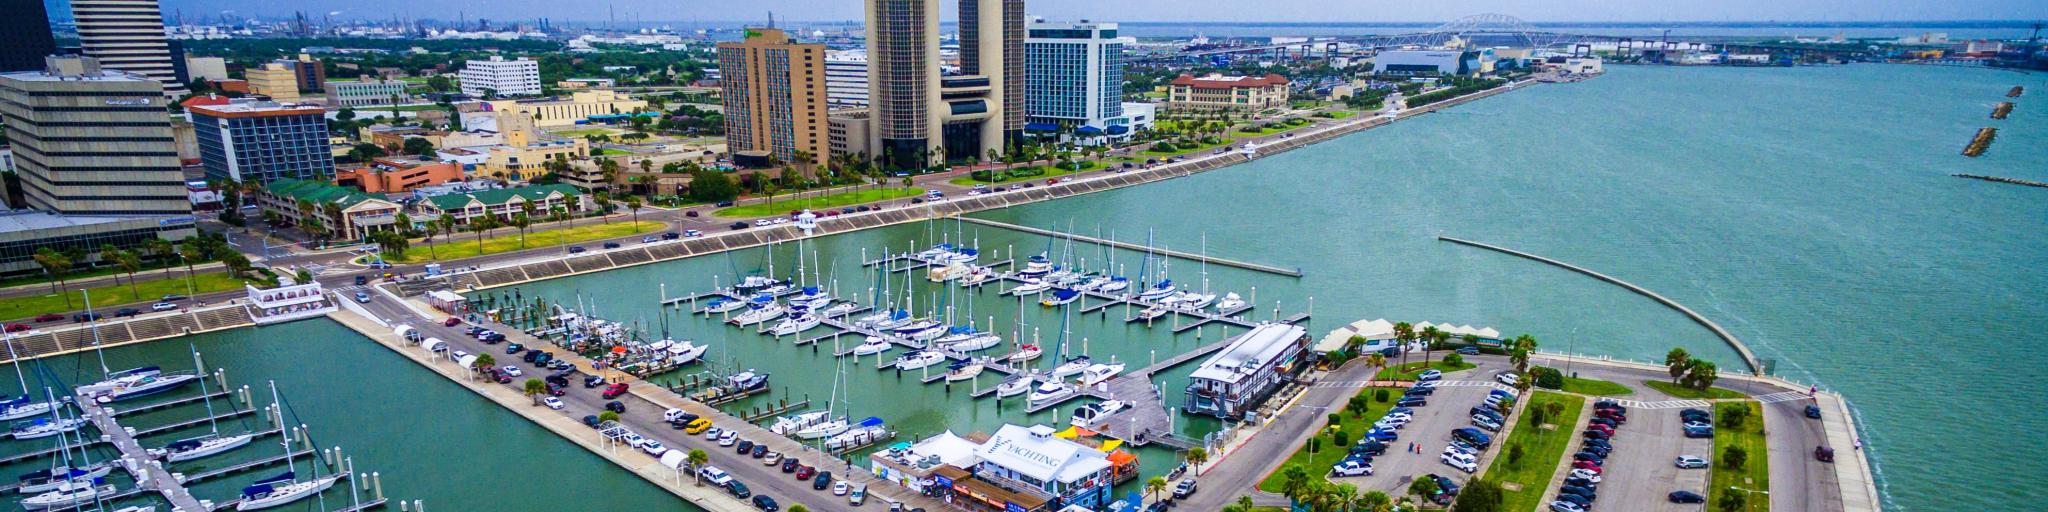 Skyline view of Corpus Christi Texas, overlooking harbor bridge and rows of piers filled with boats and sailboats 